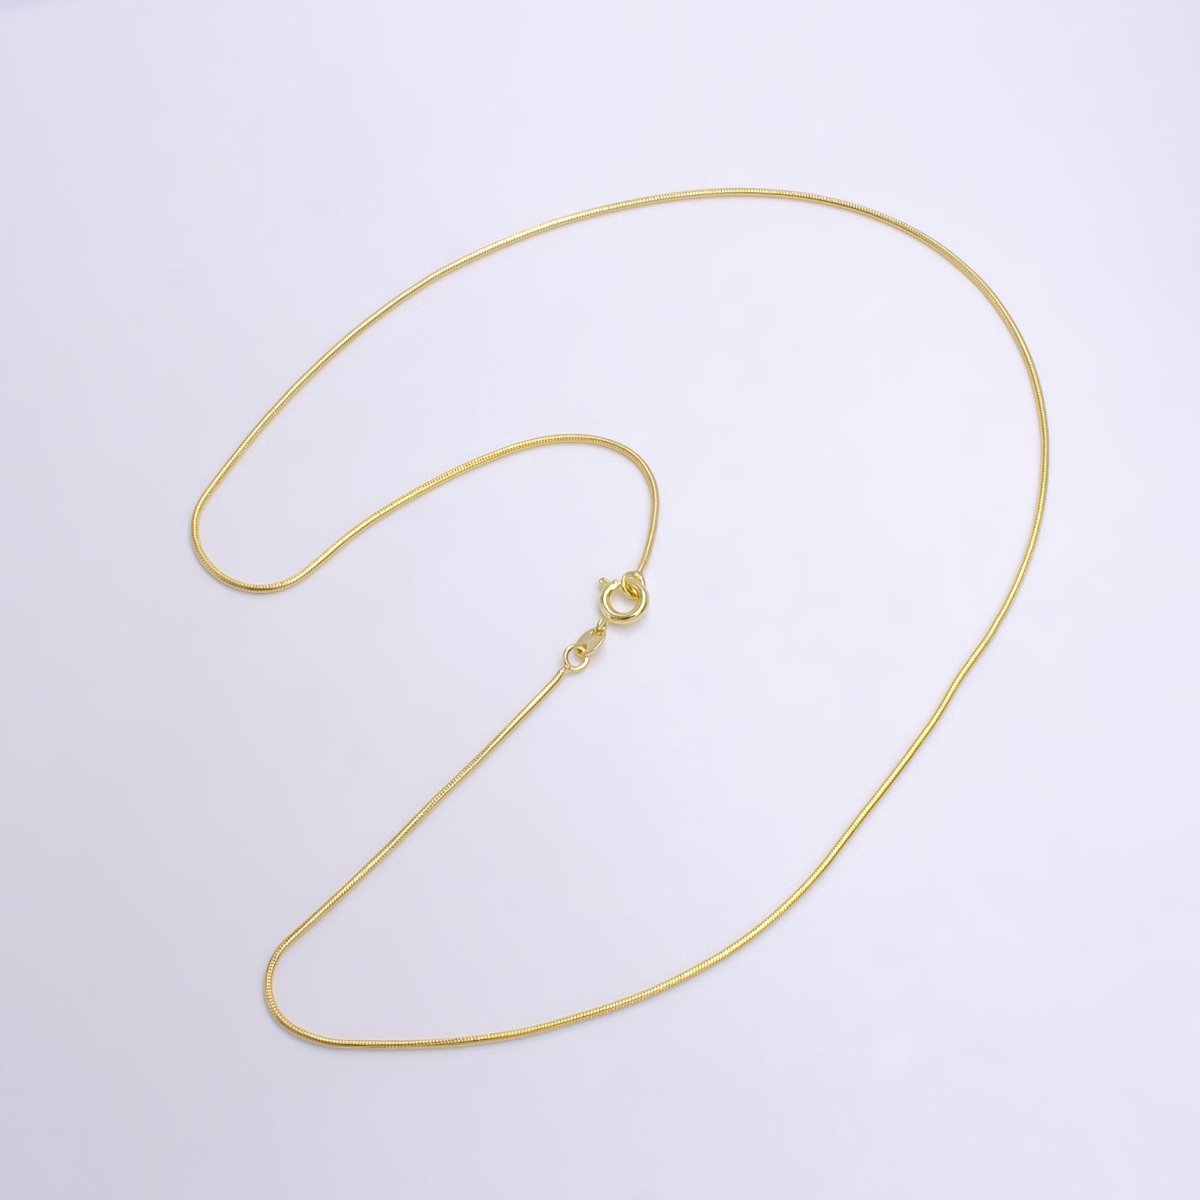 14k Gold Filled Herringbone Chain Necklace - Dainty 1mm Gold Snake Chain - 18 Inches Layering Necklace Ready To Wear w/ Lobster Clasp | WA-413 Clearance Pricing - DLUXCA